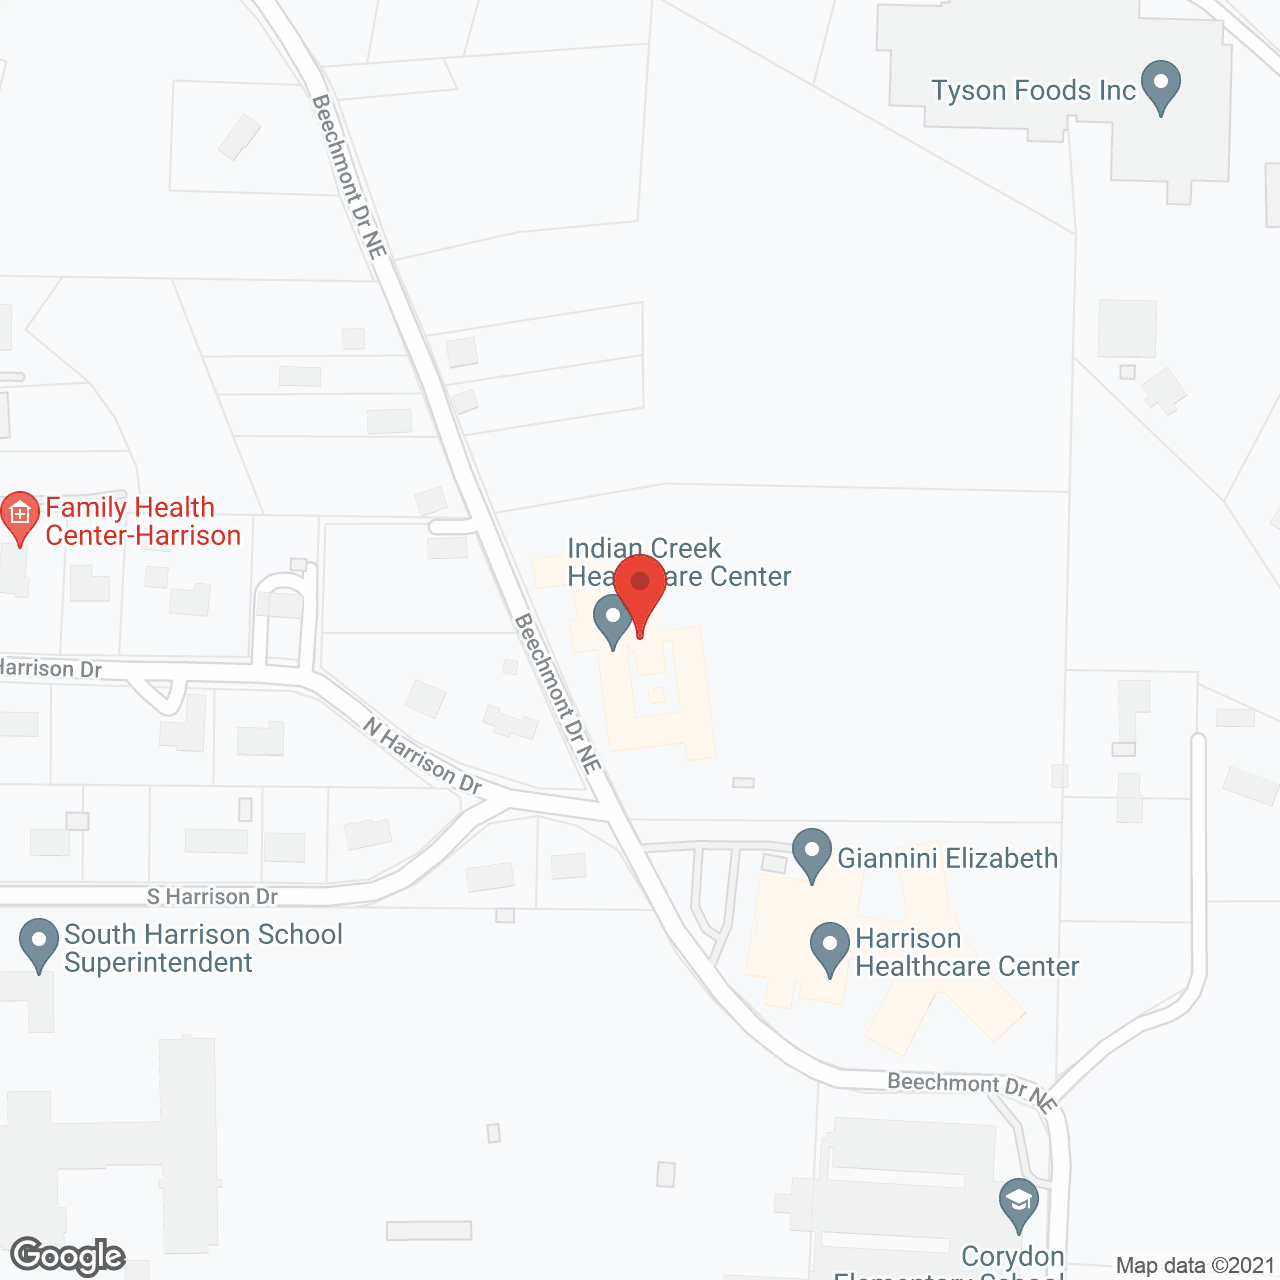 Indian Creek Health and Rehabilitation Center in google map